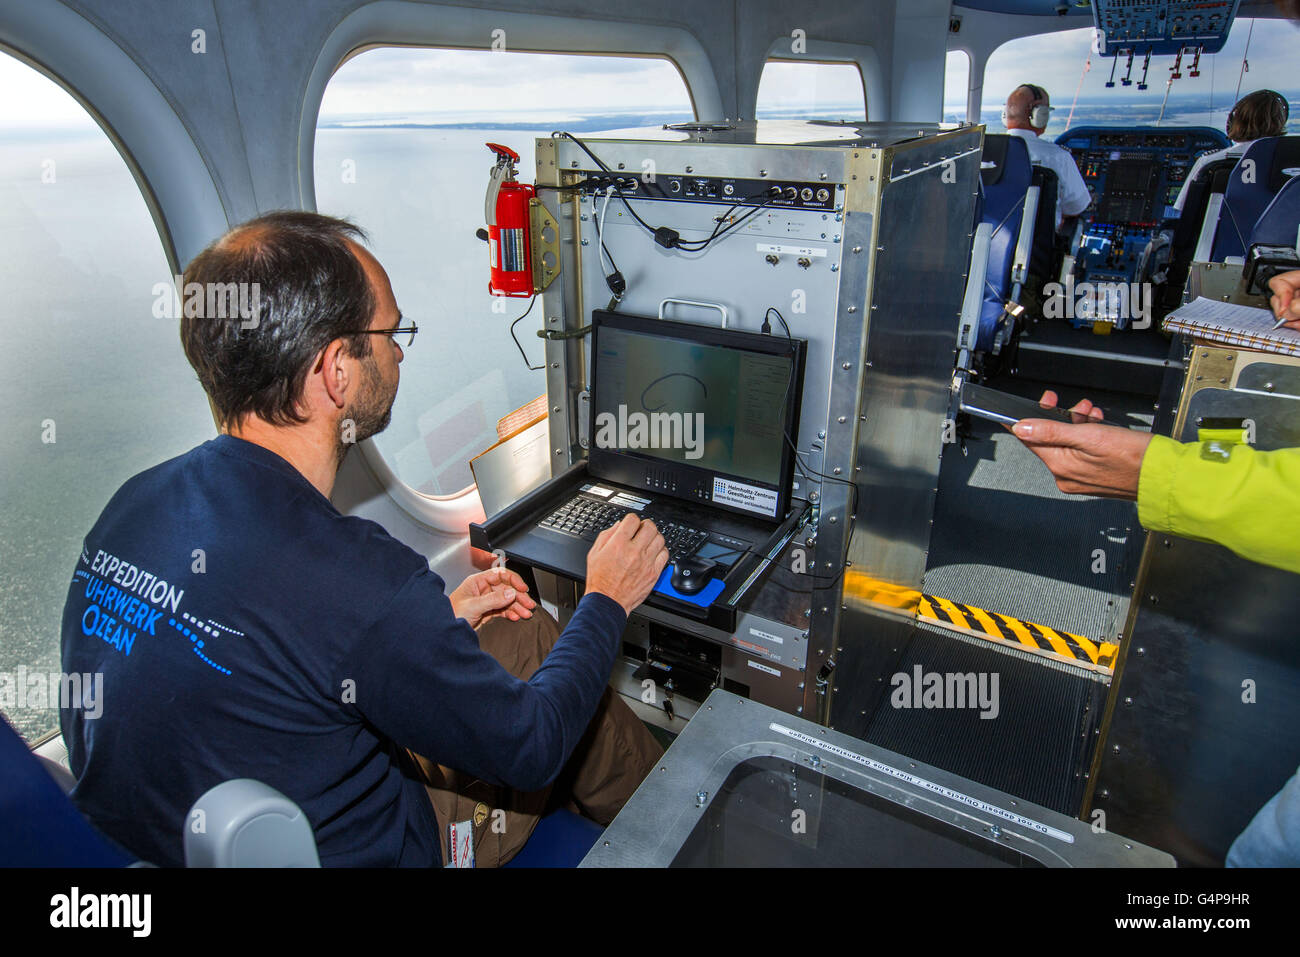 Geesthacht, Germany. 19th June, 2016. In the control centre of a zeppelin the biological oceanographer Ruediger Roettgers works during a measurement flight over the Baltic Sea from the Peenemuende airfield in Peenemuende, Germany, 19 June 2016. The incoming measurements belong to an expedition for the research of marine vortices. The 75-meter-long airship is equipped with special high-resolution cameras, with which the smallest temperature differences of 0.03 degrees and colour differences can be registered in the water. The researchers collect data on the influence of unstable small sea swirl Stock Photo